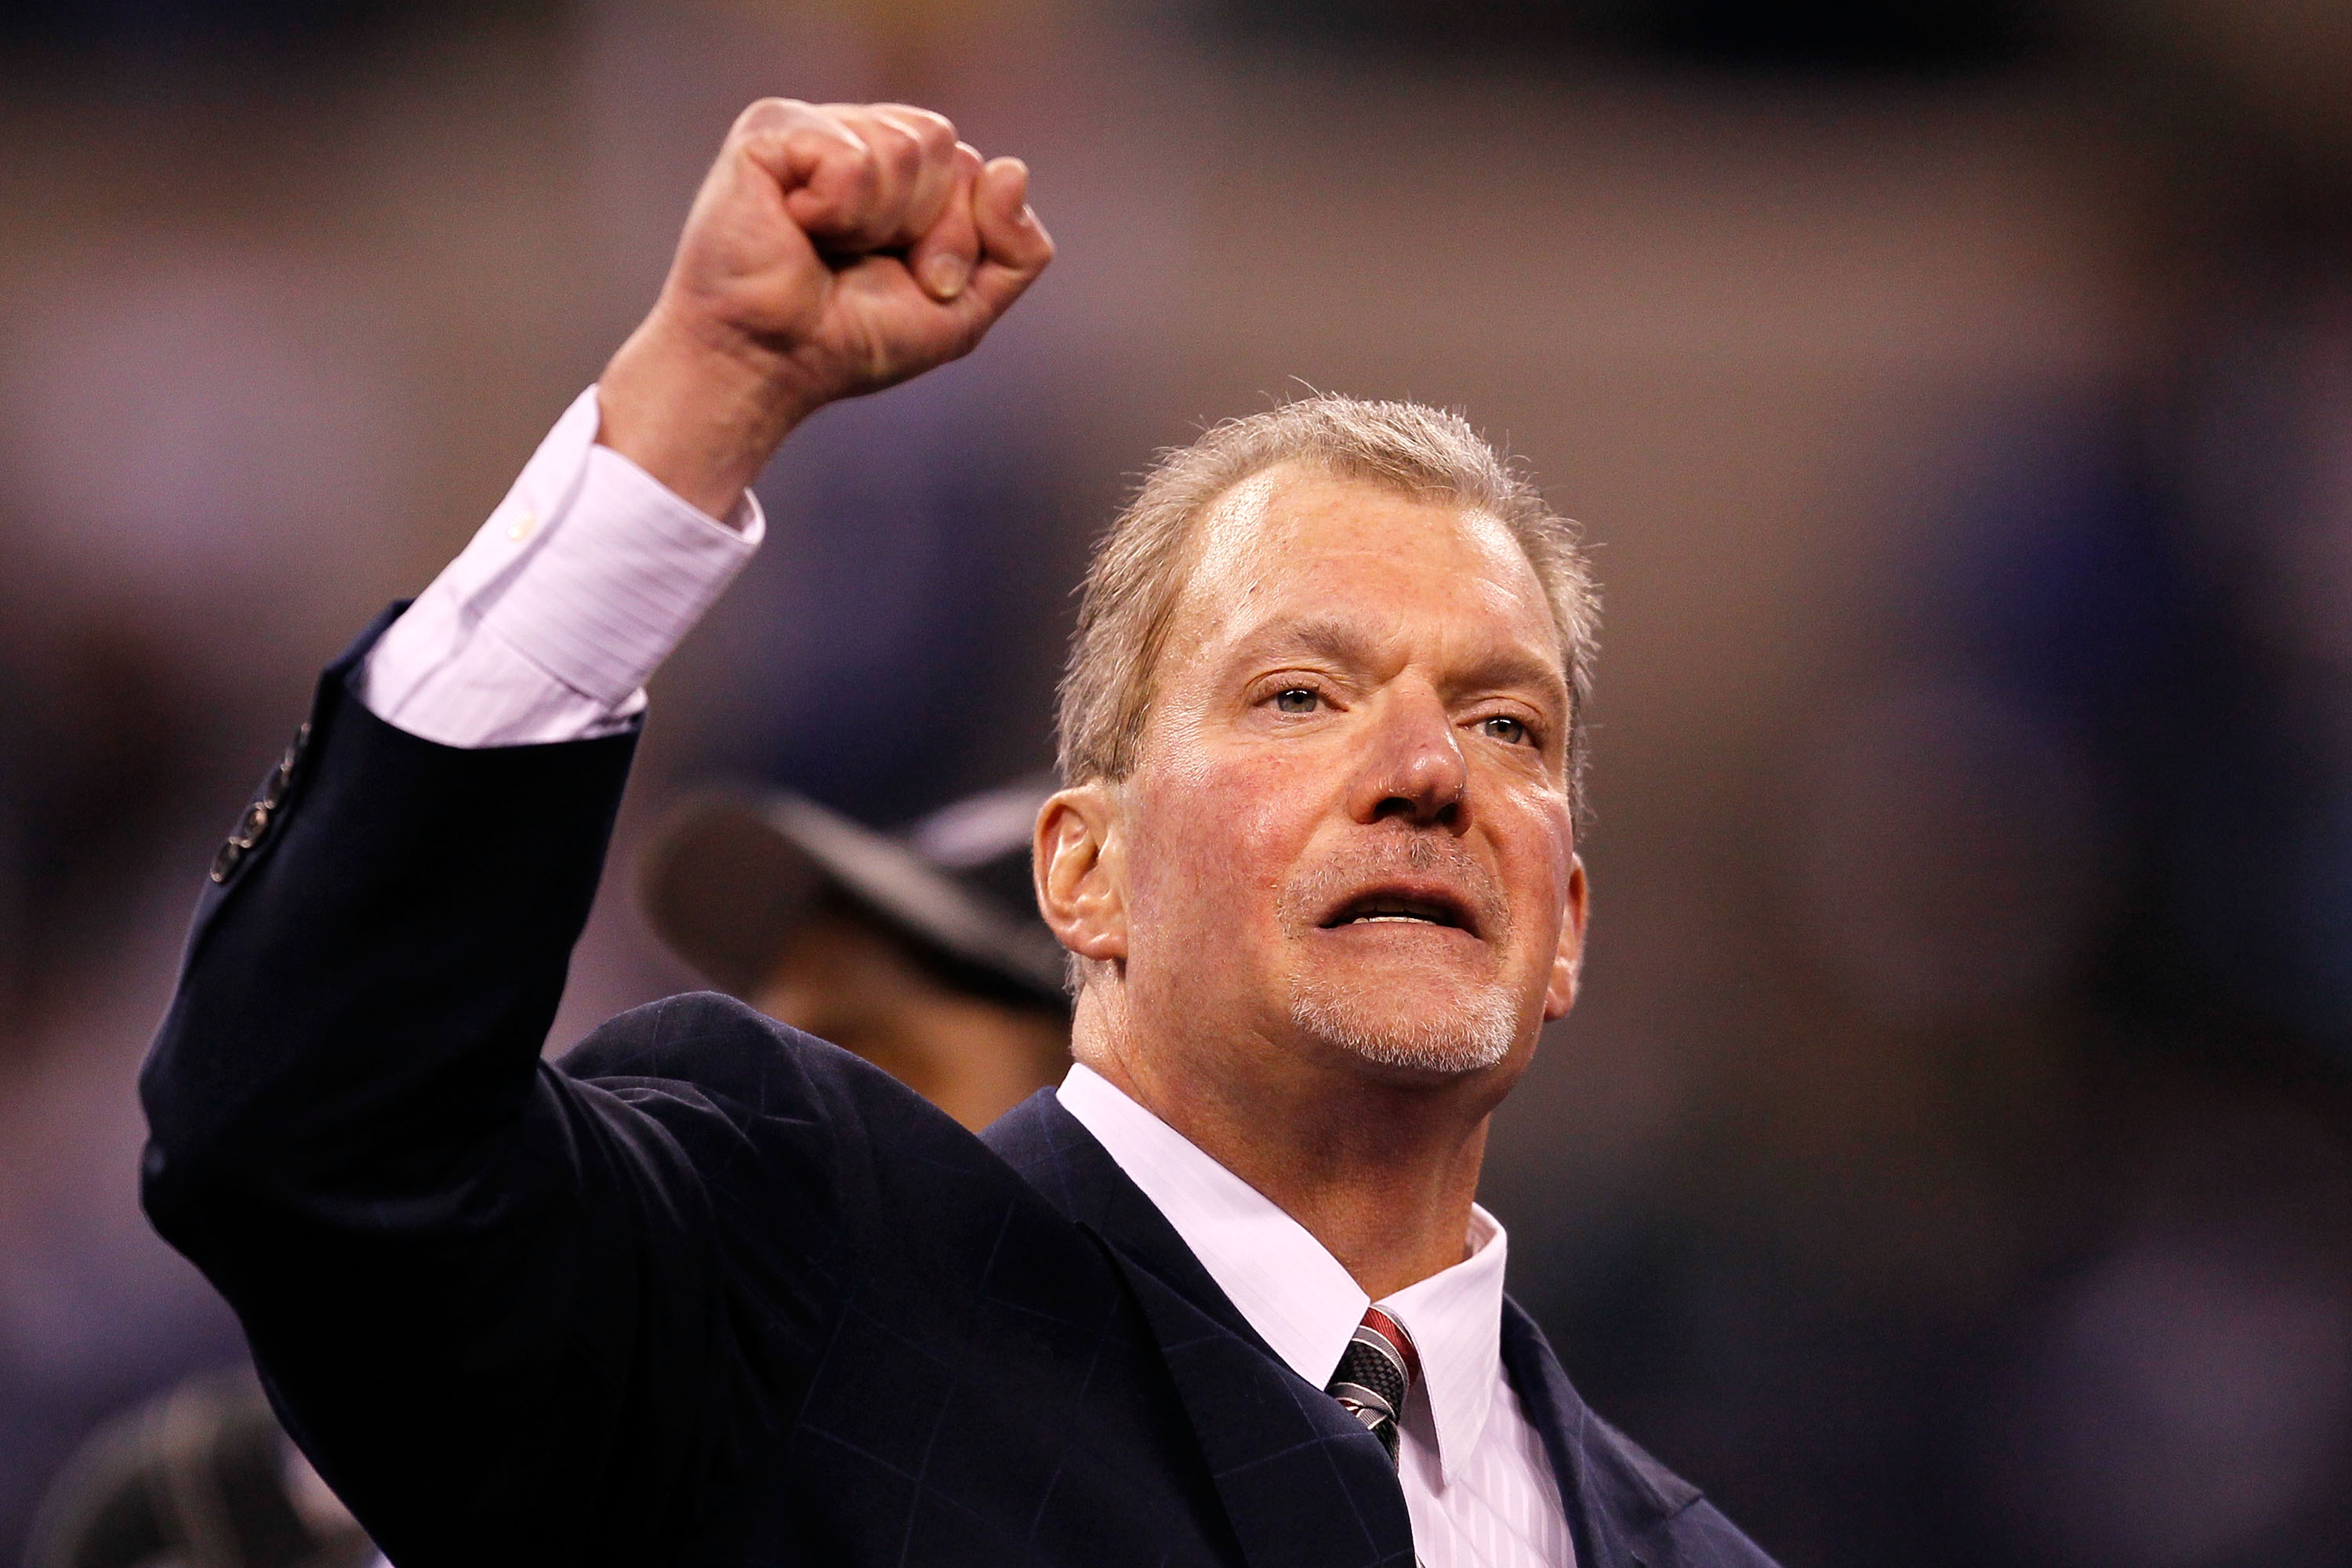 Jim Irsay, his ‘Black Mother Dorthy’ and the myth of the magical negro friend